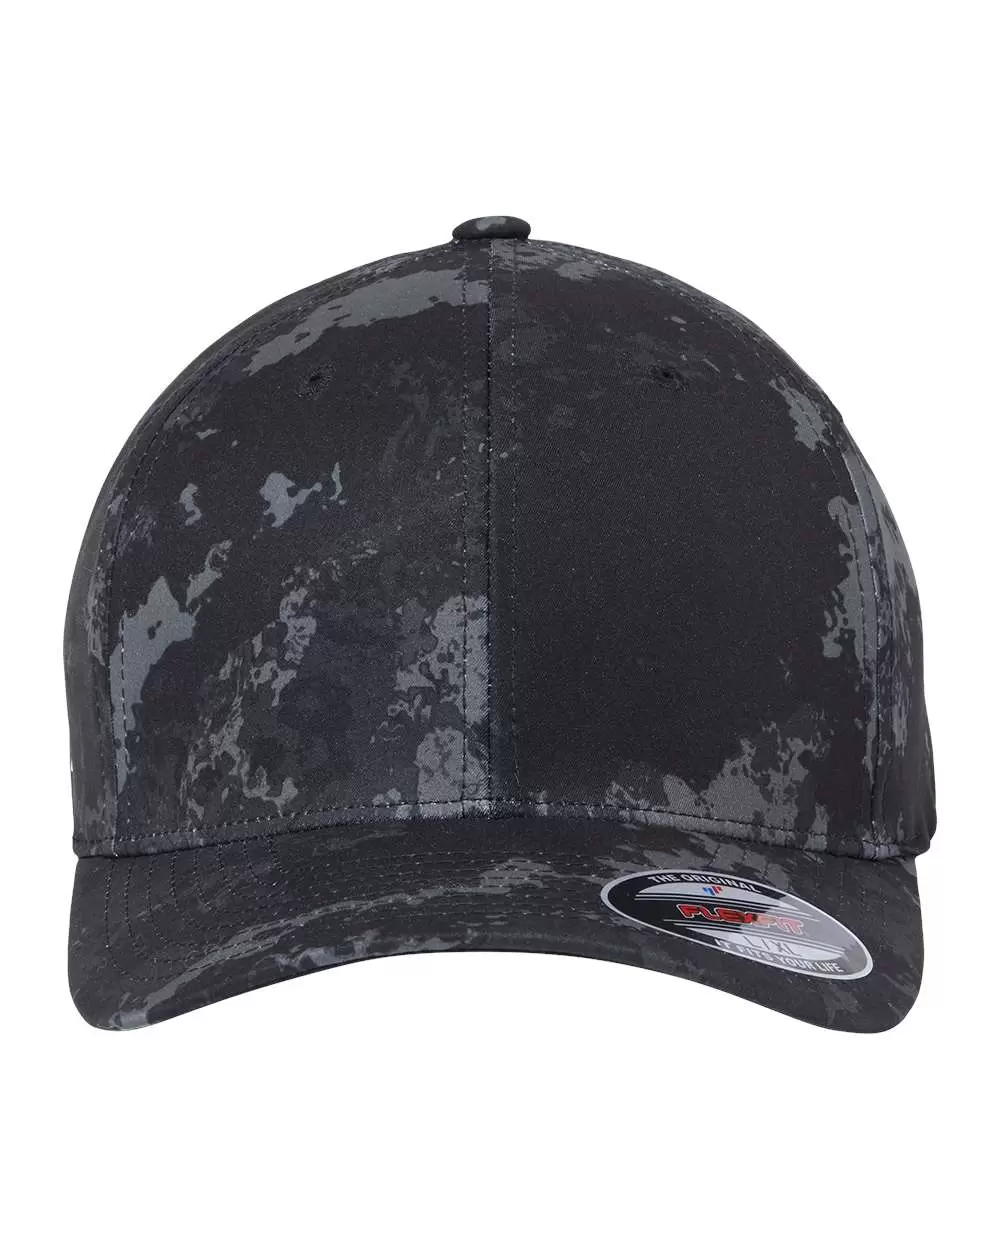 Yupoong-Flex Fit 6277 Adult 6-Panel VEIL® Camo Cap - From